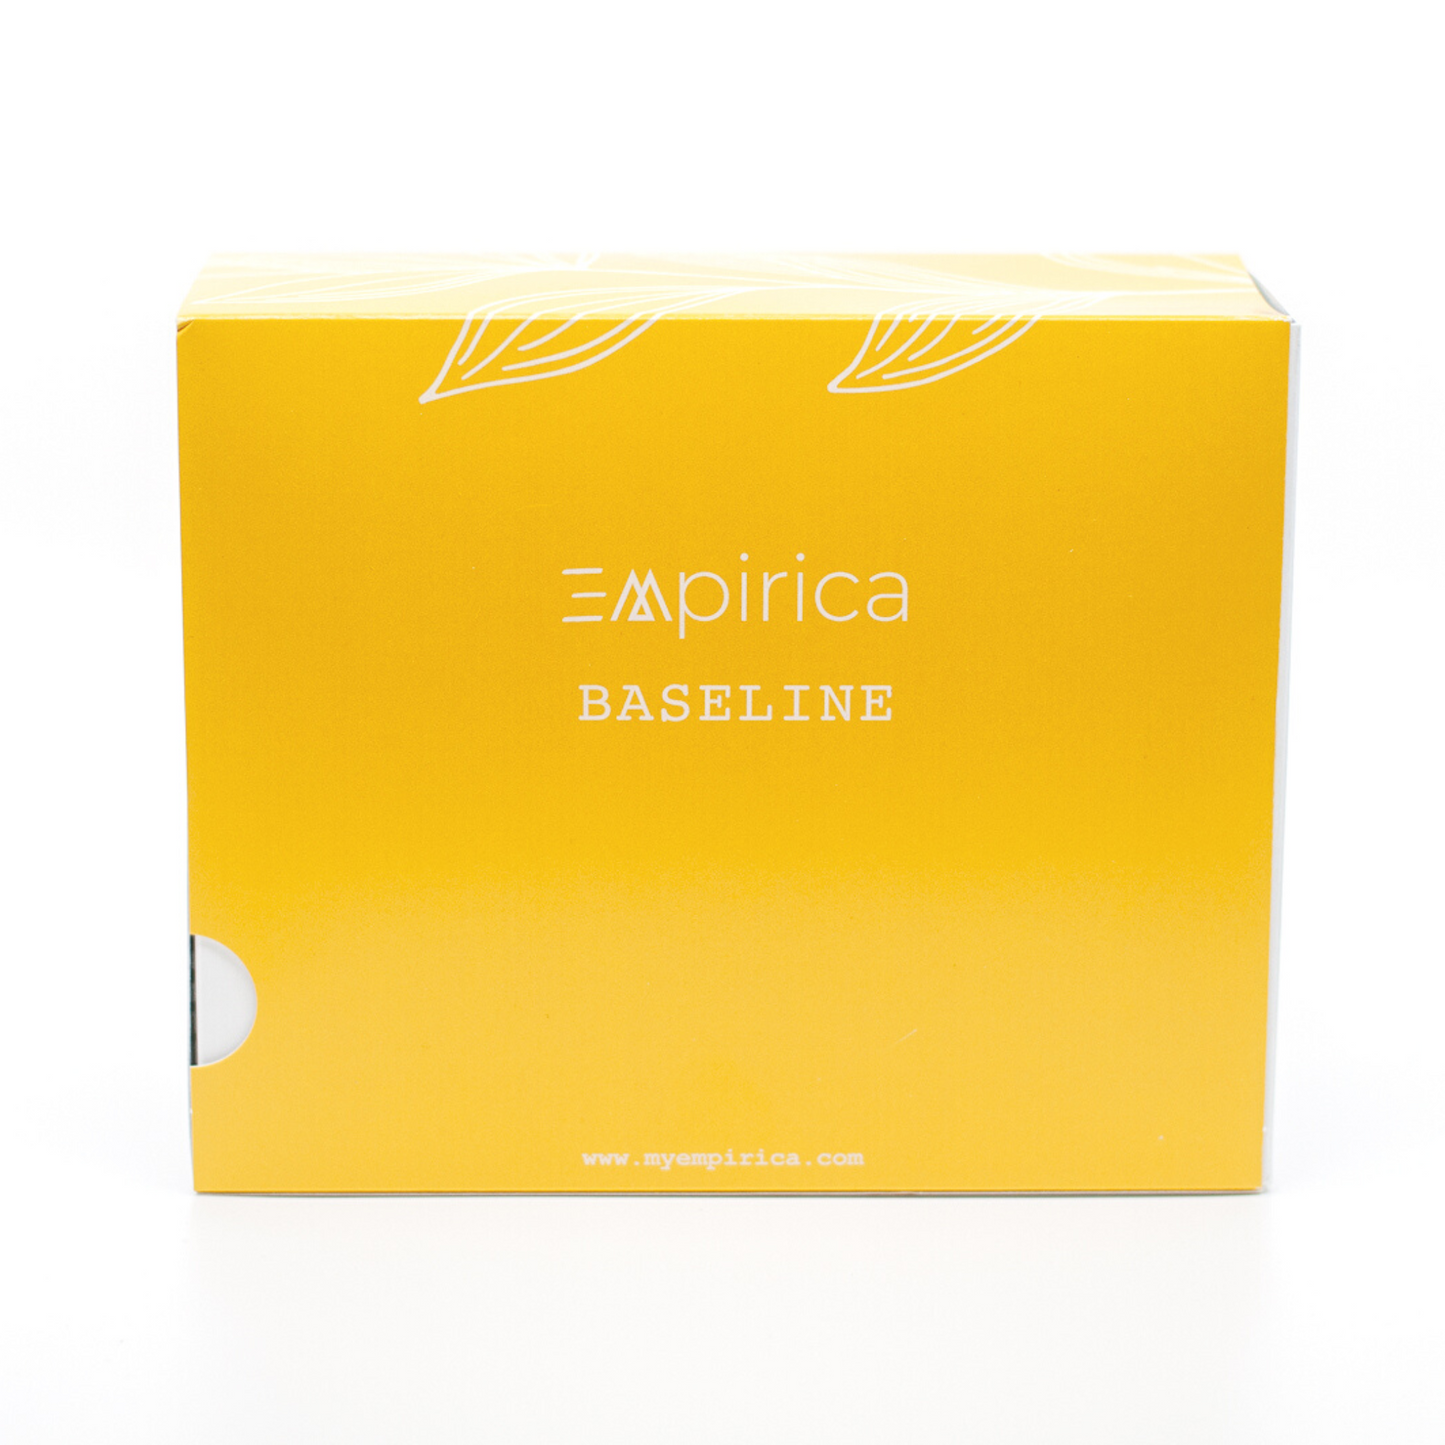 Copy of Baseline Pack - Empirica Supplements